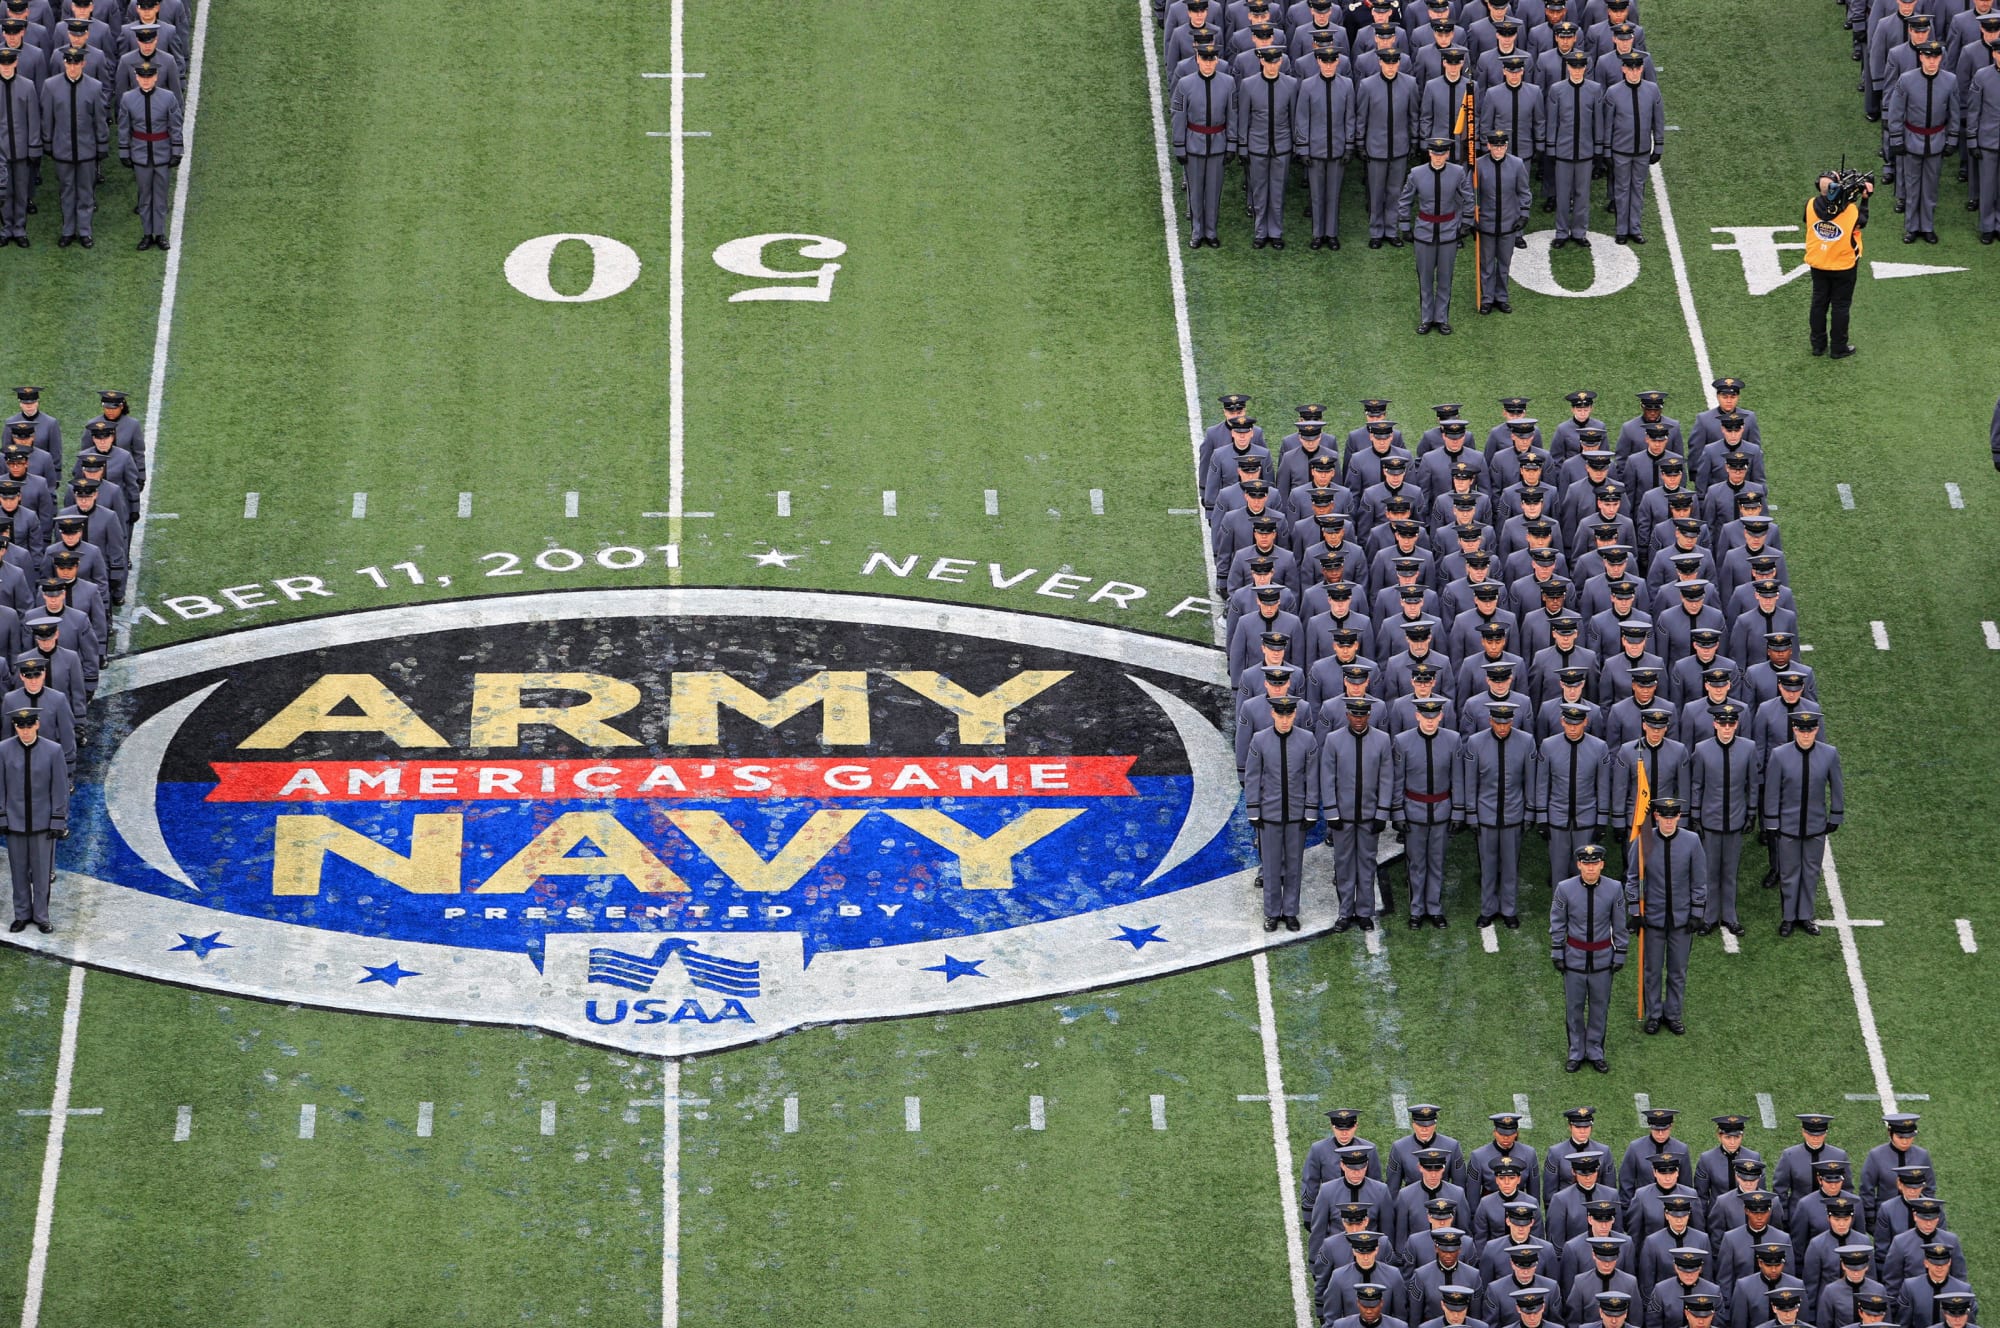 Are the Army and Navy football players in the military?